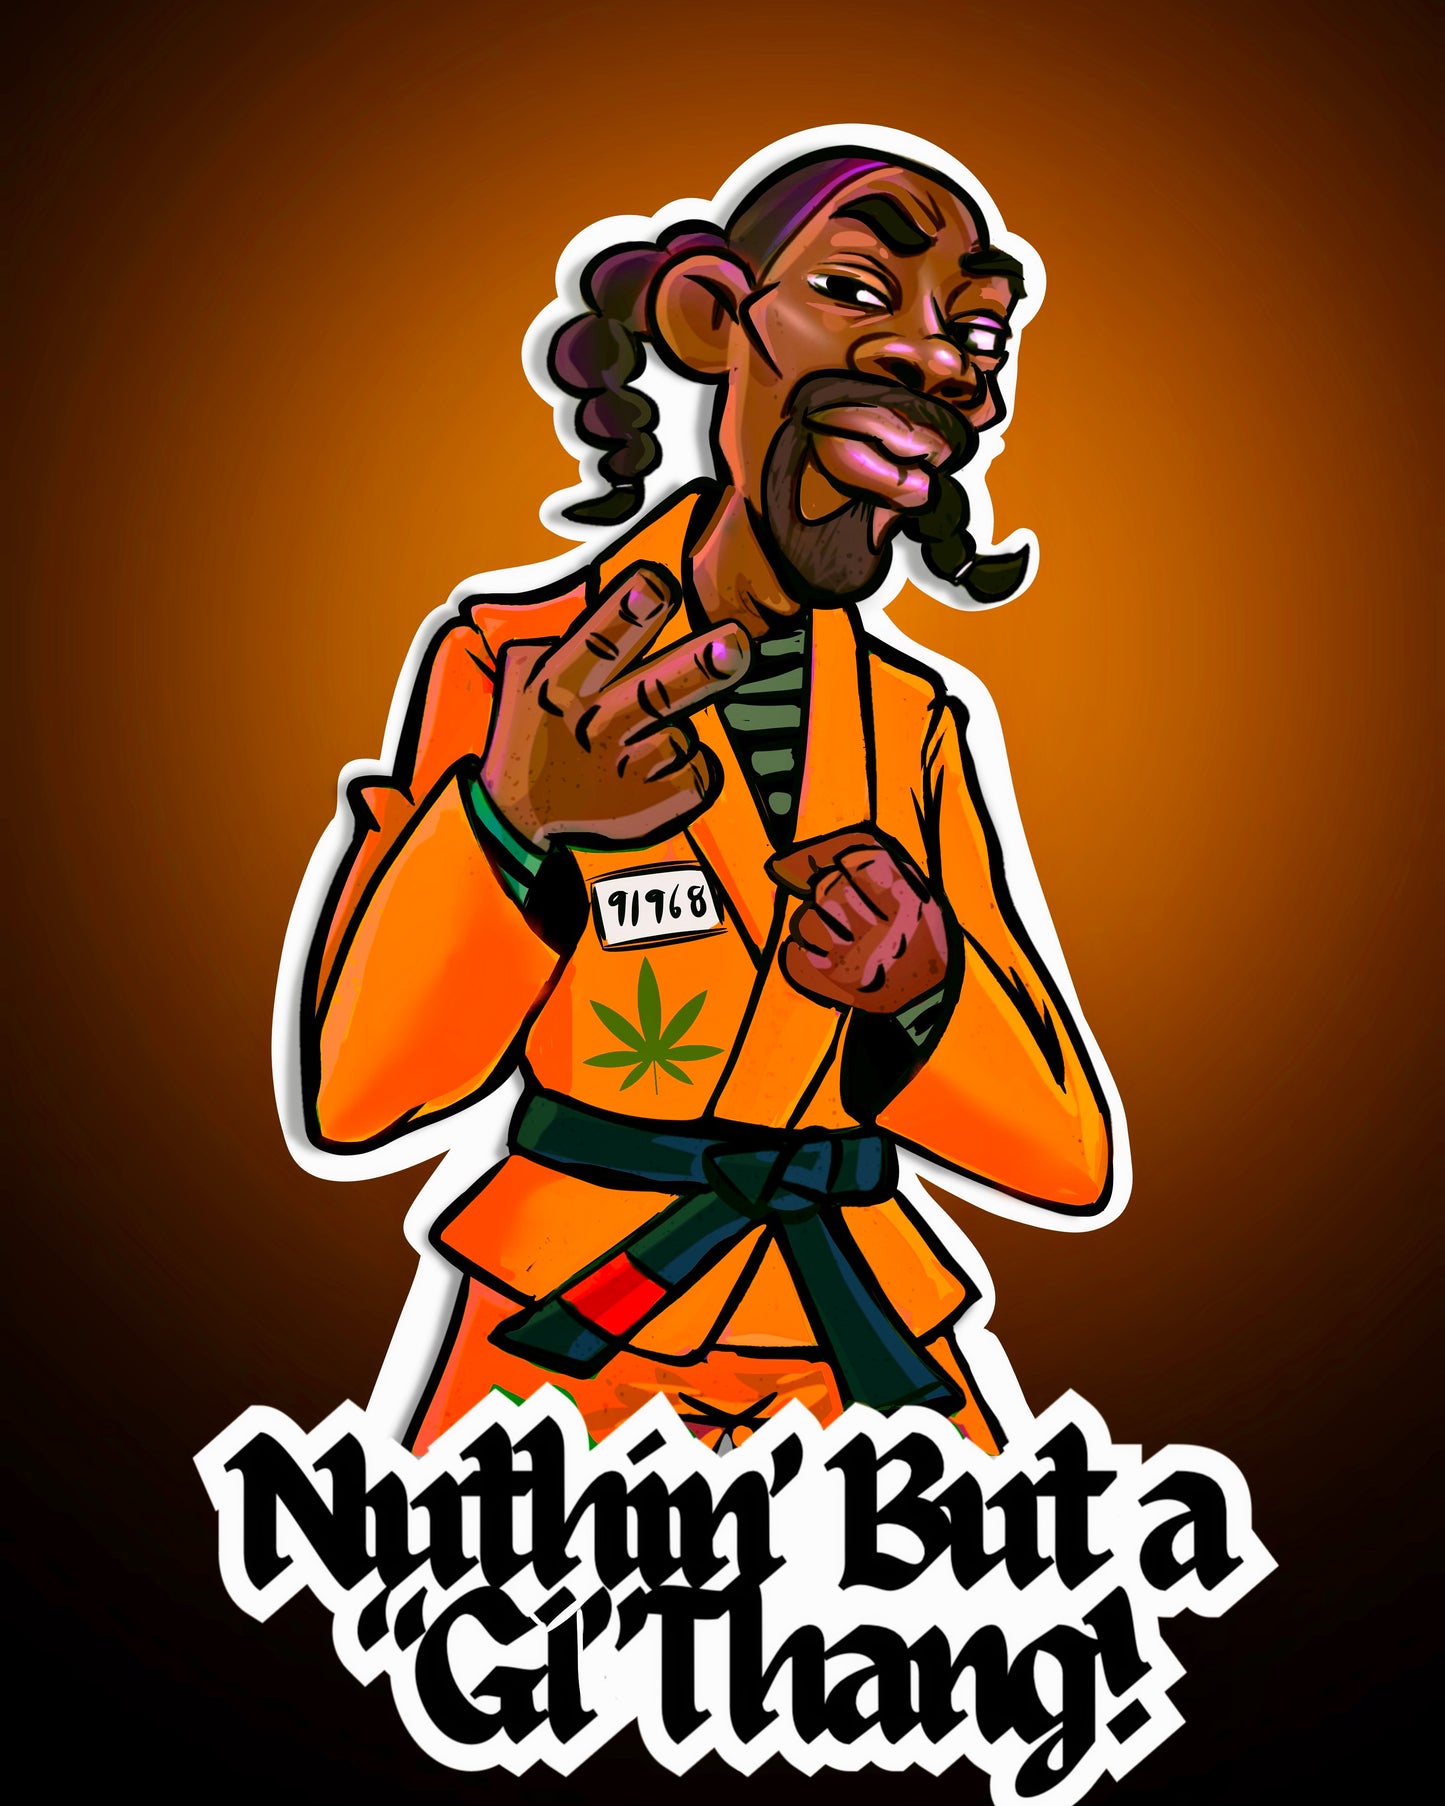 Snoop Dogg “Nuthin' but a 'GI' thang” Vinyl sticker